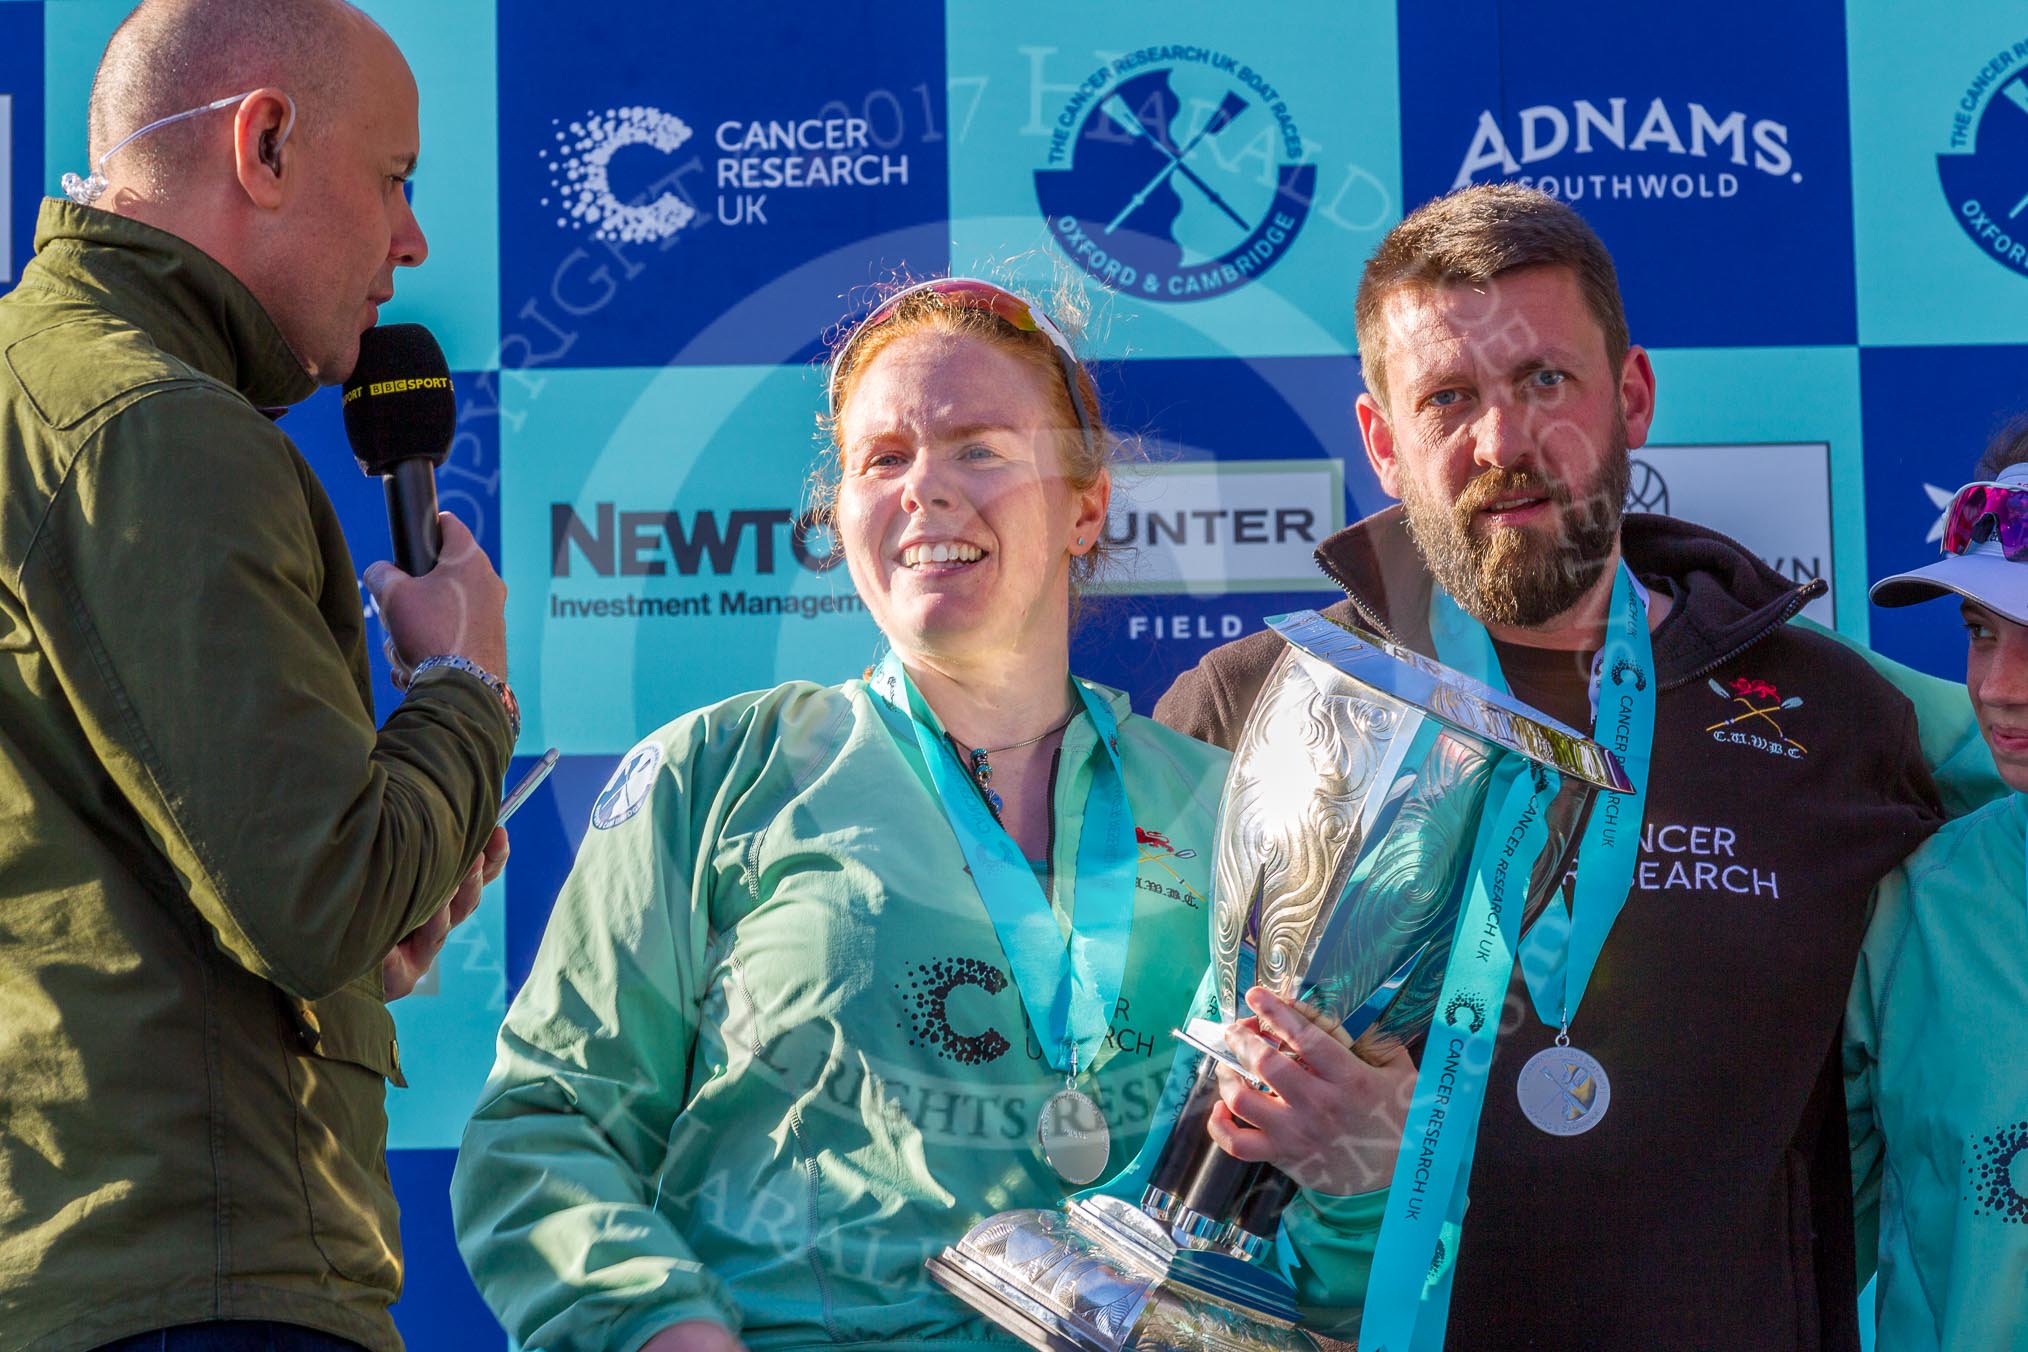 The Boat Race season 2017 -  The Cancer Research Women's Boat Race: CUWBC president Ashton Brown, with the Women's Boat Race trophy, being interviewed by the BBC's Jason Mohammad. On the right CUWBC head coach Rob Barker.
River Thames between Putney Bridge and Mortlake,
London SW15,

United Kingdom,
on 02 April 2017 at 17:11, image #242